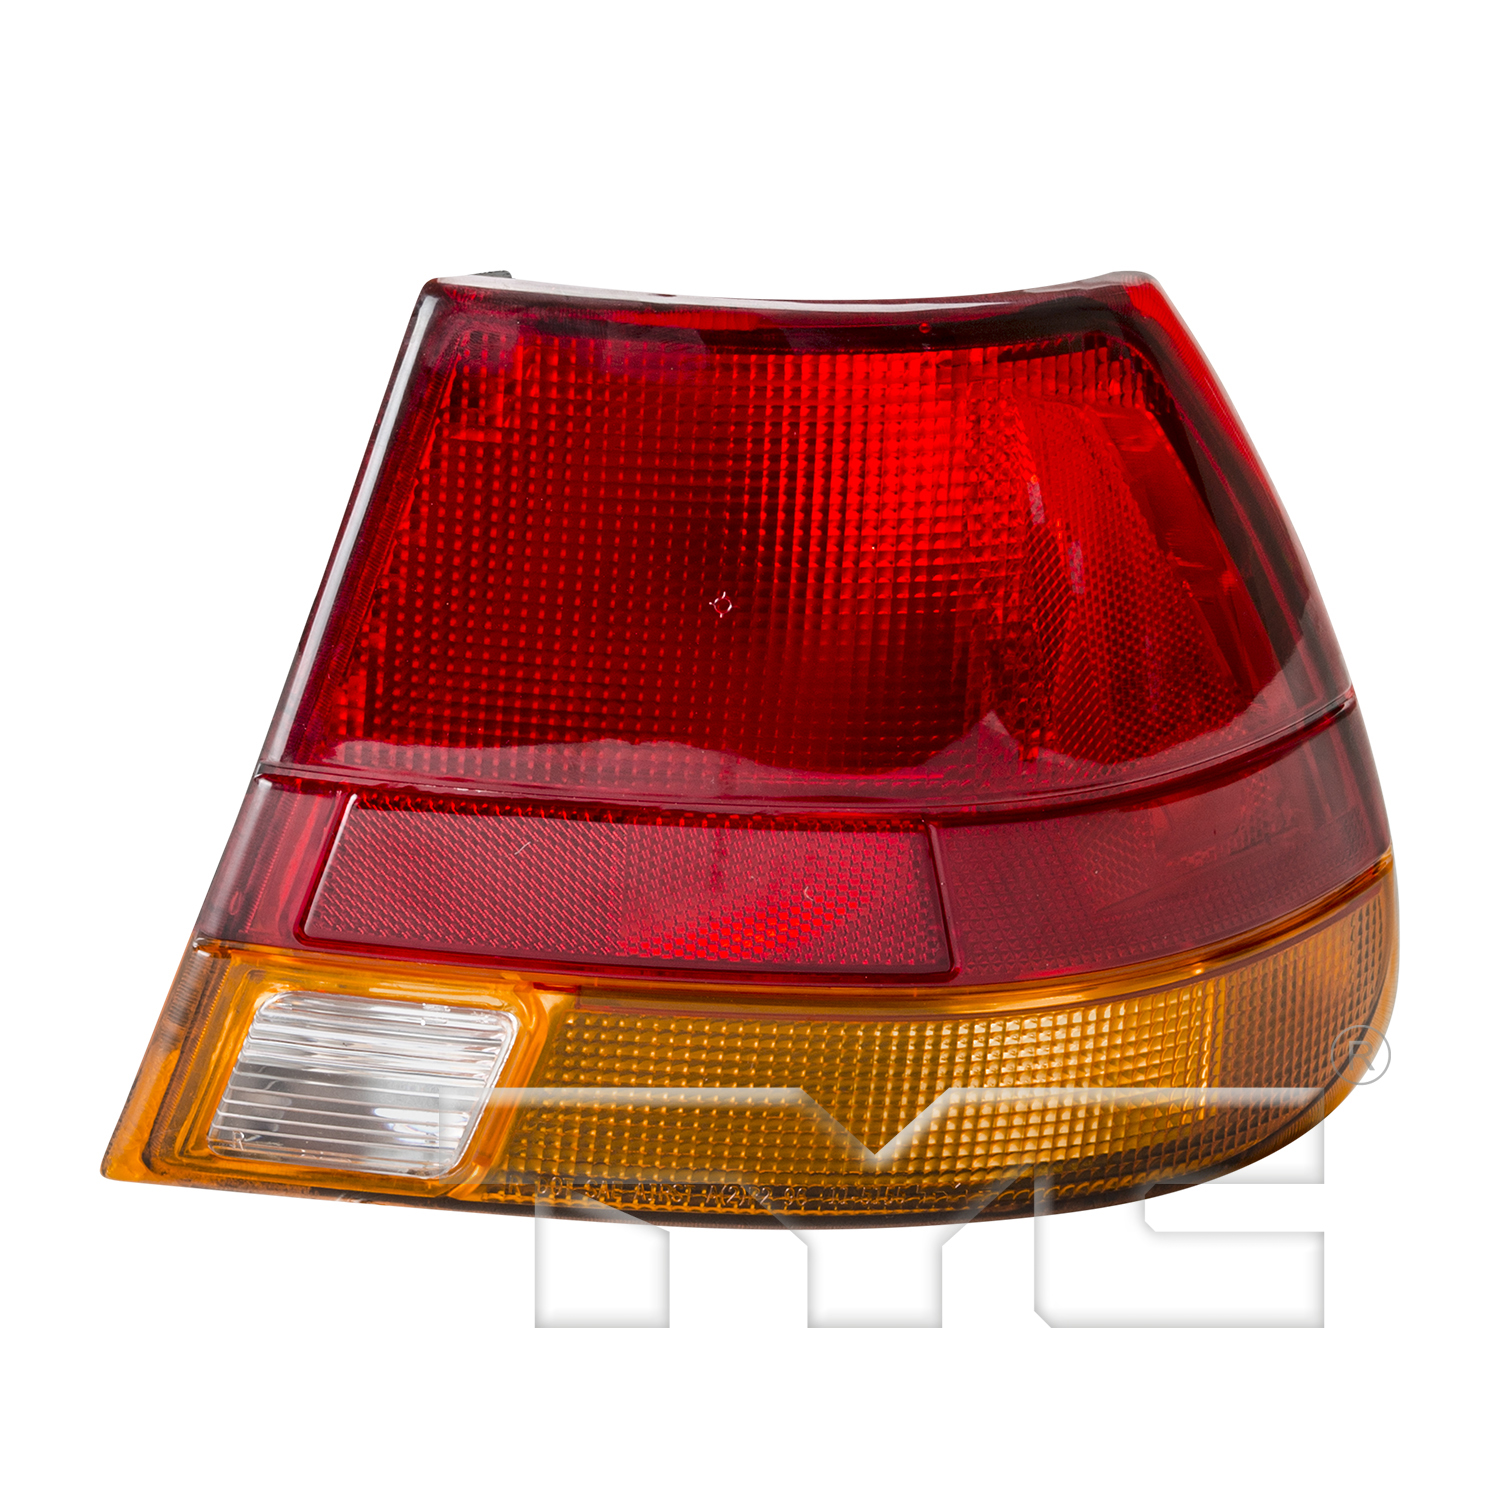 Aftermarket TAILLIGHTS for SATURN - SL2, SL2,96-97,RT Taillamp lens/housing